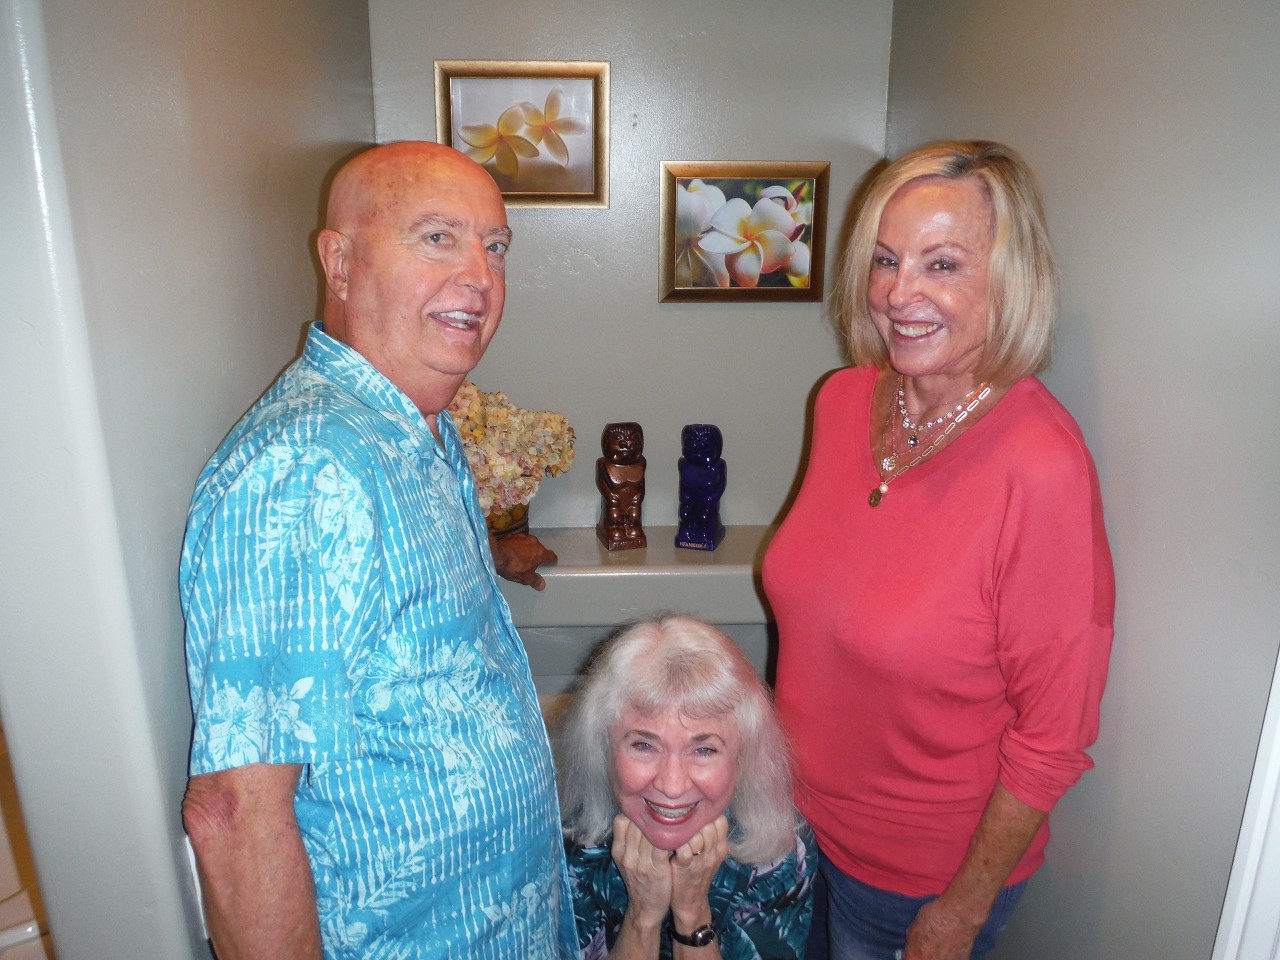 Dick and Sally Daniels posted 11 21 23